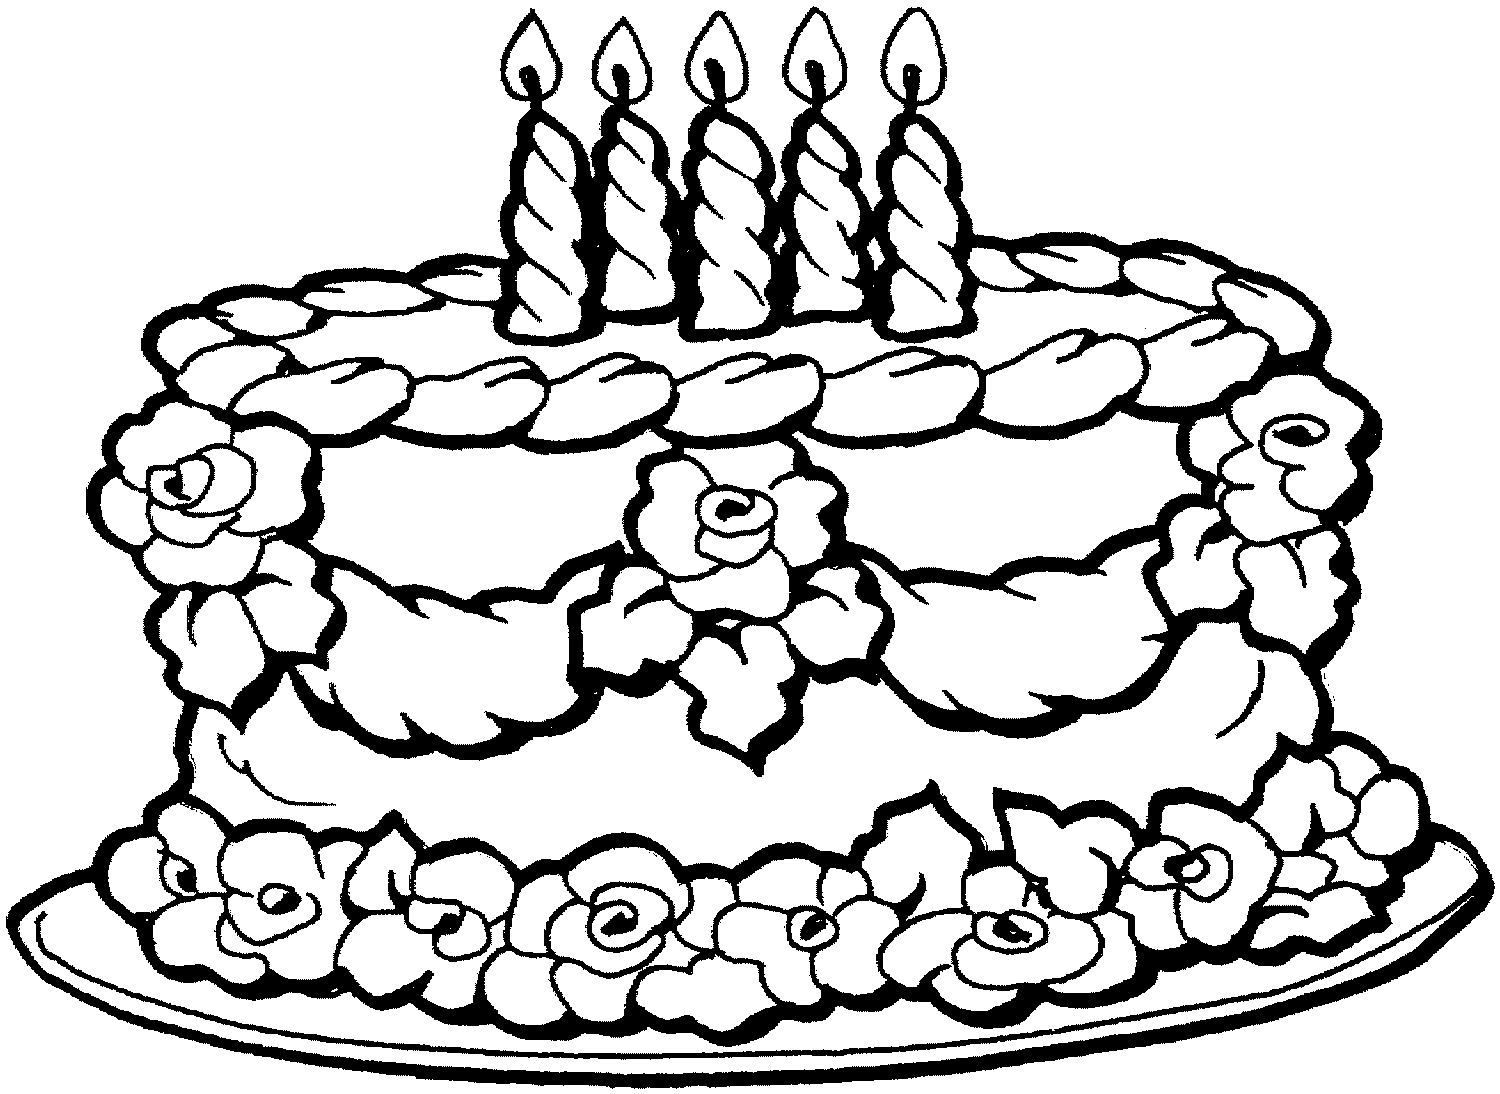 Birthday Cake Coloring Pages For Kids | Printable Coloring Pages ...